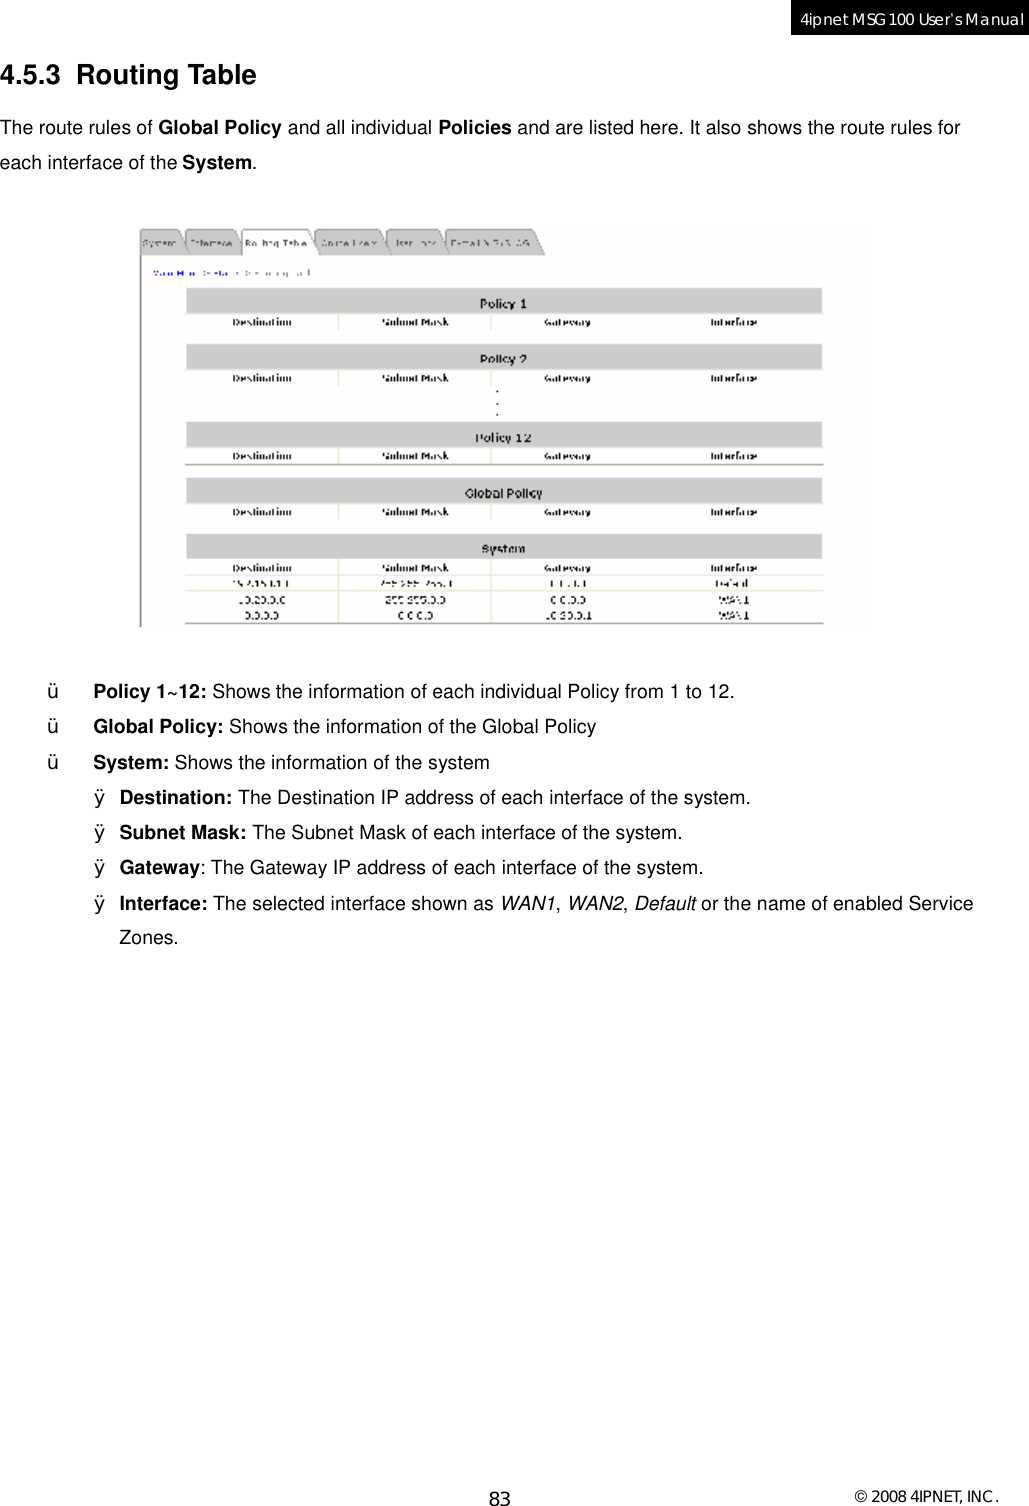  © 2008 4IPNET, INC. 83 4ipnet MSG100 User’s Manual  4.5.3 Routing Table The route rules of Global Policy and all individual Policies and are listed here. It also shows the route rules for each interface of the System.      Ÿ Policy 1~12: Shows the information of each individual Policy from 1 to 12. Ÿ Global Policy: Shows the information of the Global Policy Ÿ System: Shows the information of the system Ø Destination: The Destination IP address of each interface of the system. Ø Subnet Mask: The Subnet Mask of each interface of the system. Ø Gateway: The Gateway IP address of each interface of the system. Ø Interface: The selected interface shown as WAN1, WAN2, Default or the name of enabled Service Zones.    